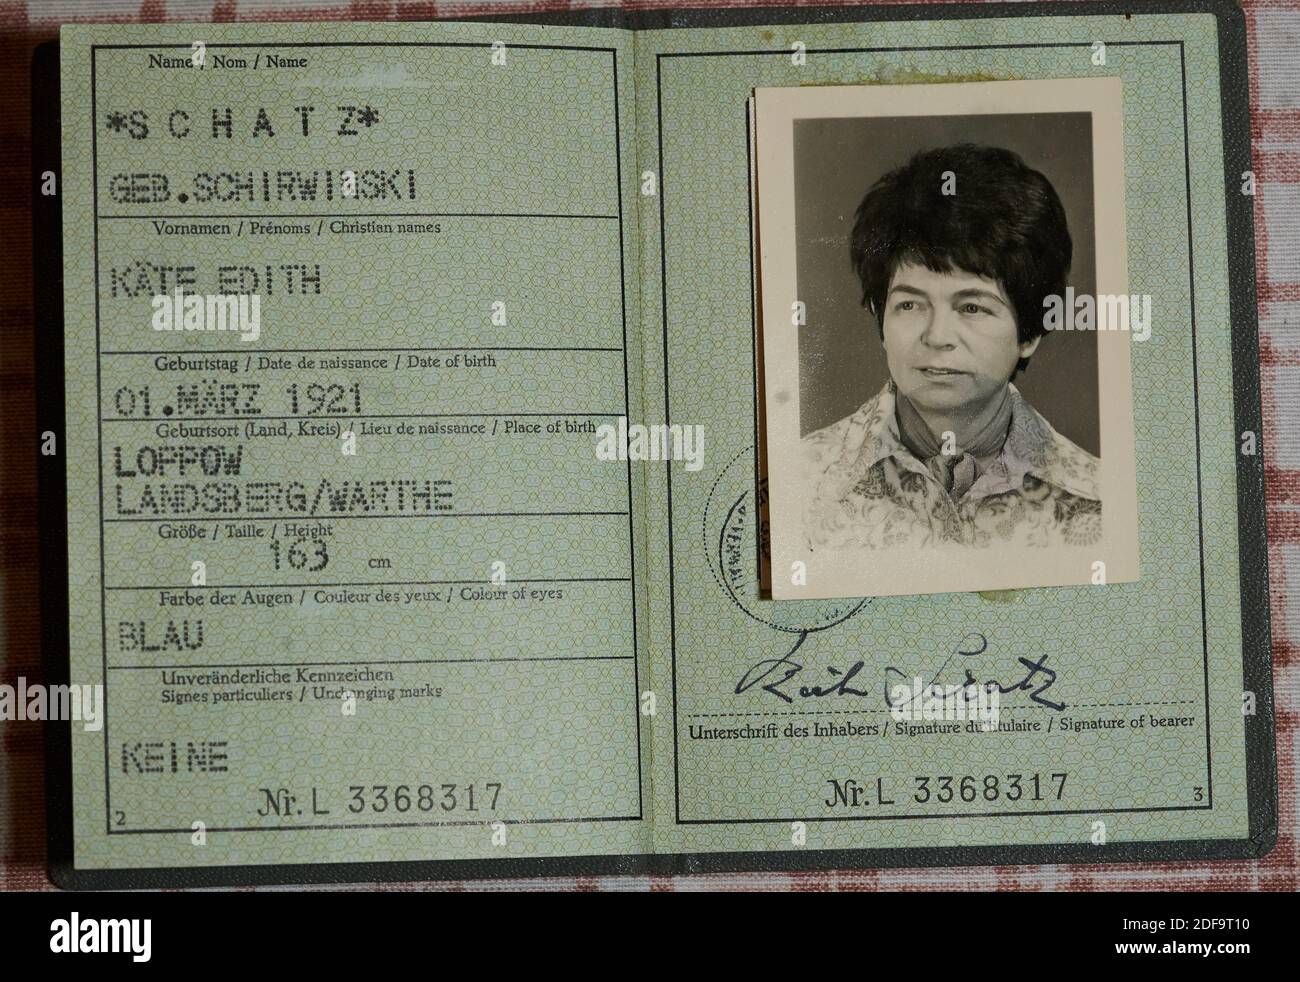 Historical Photo:  Identity card of a Kaete Schatz, born 1.3.1921 in Landsberg an der Warthe of the Federal Republic of Germany around 1960. Reproduction in Marktoberdorf, Germany, October 26, 2020.  © Peter Schatz / Alamy Stock Photos Stock Photo